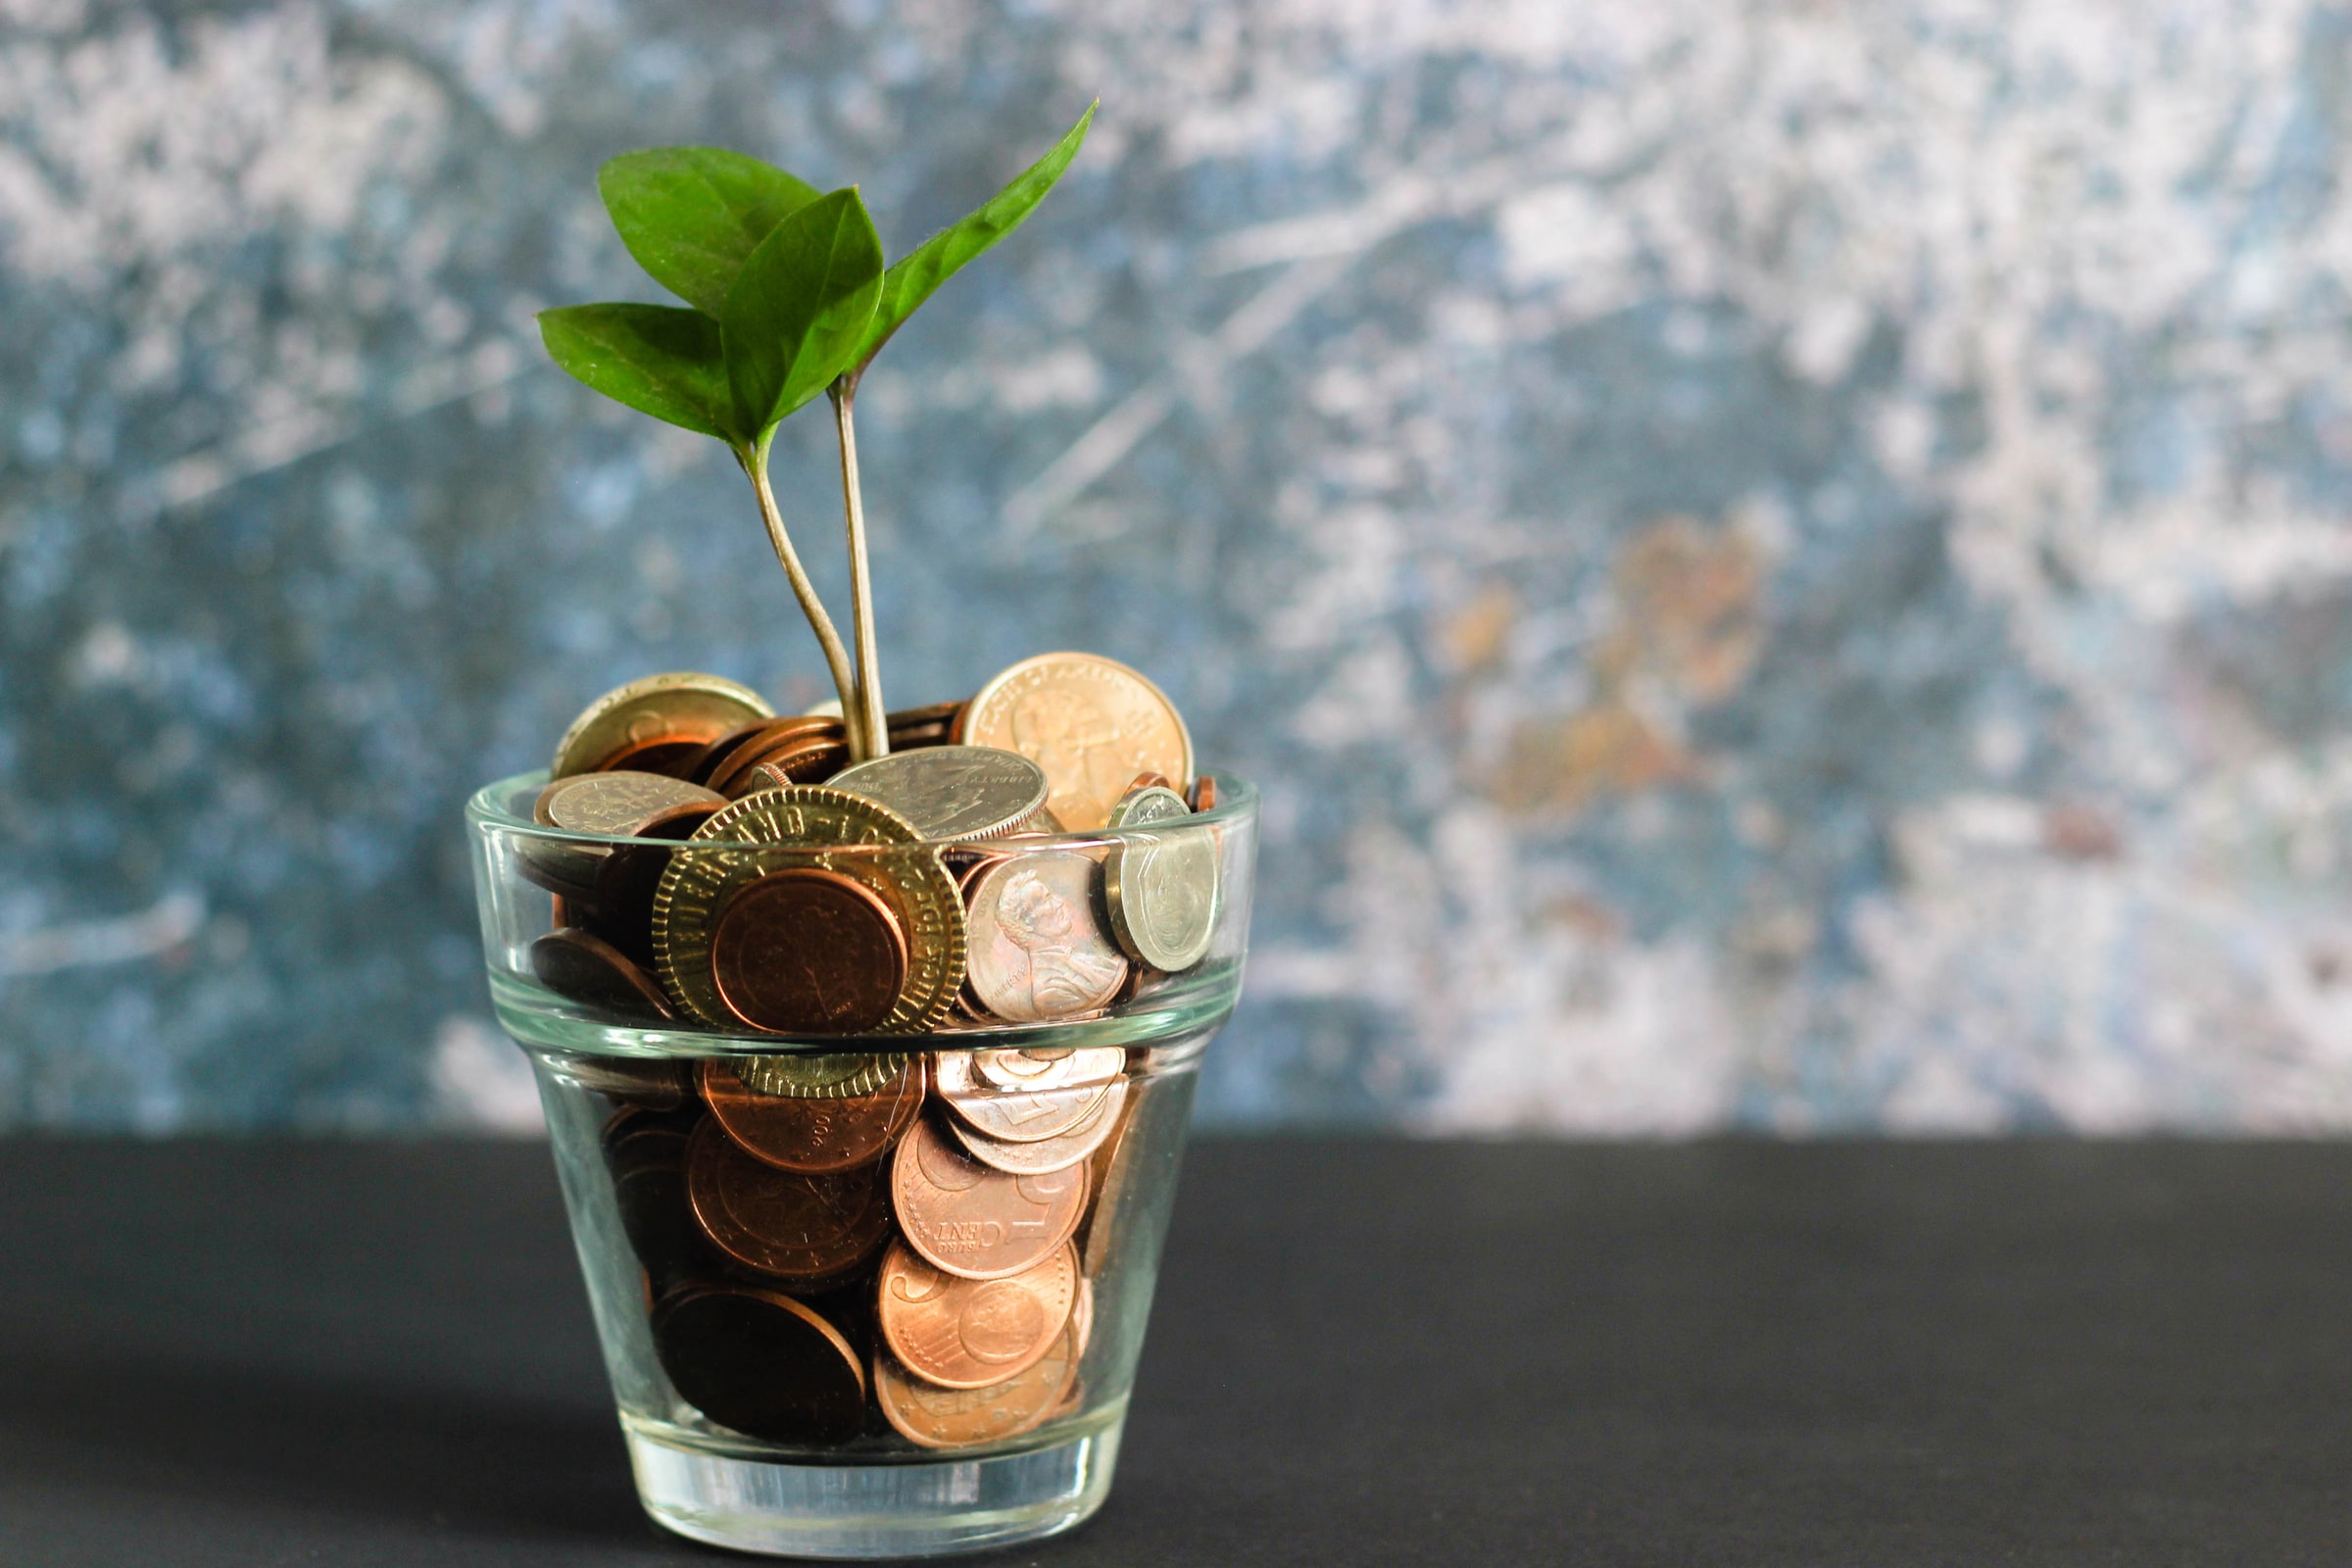 Coins inside a potted plant.